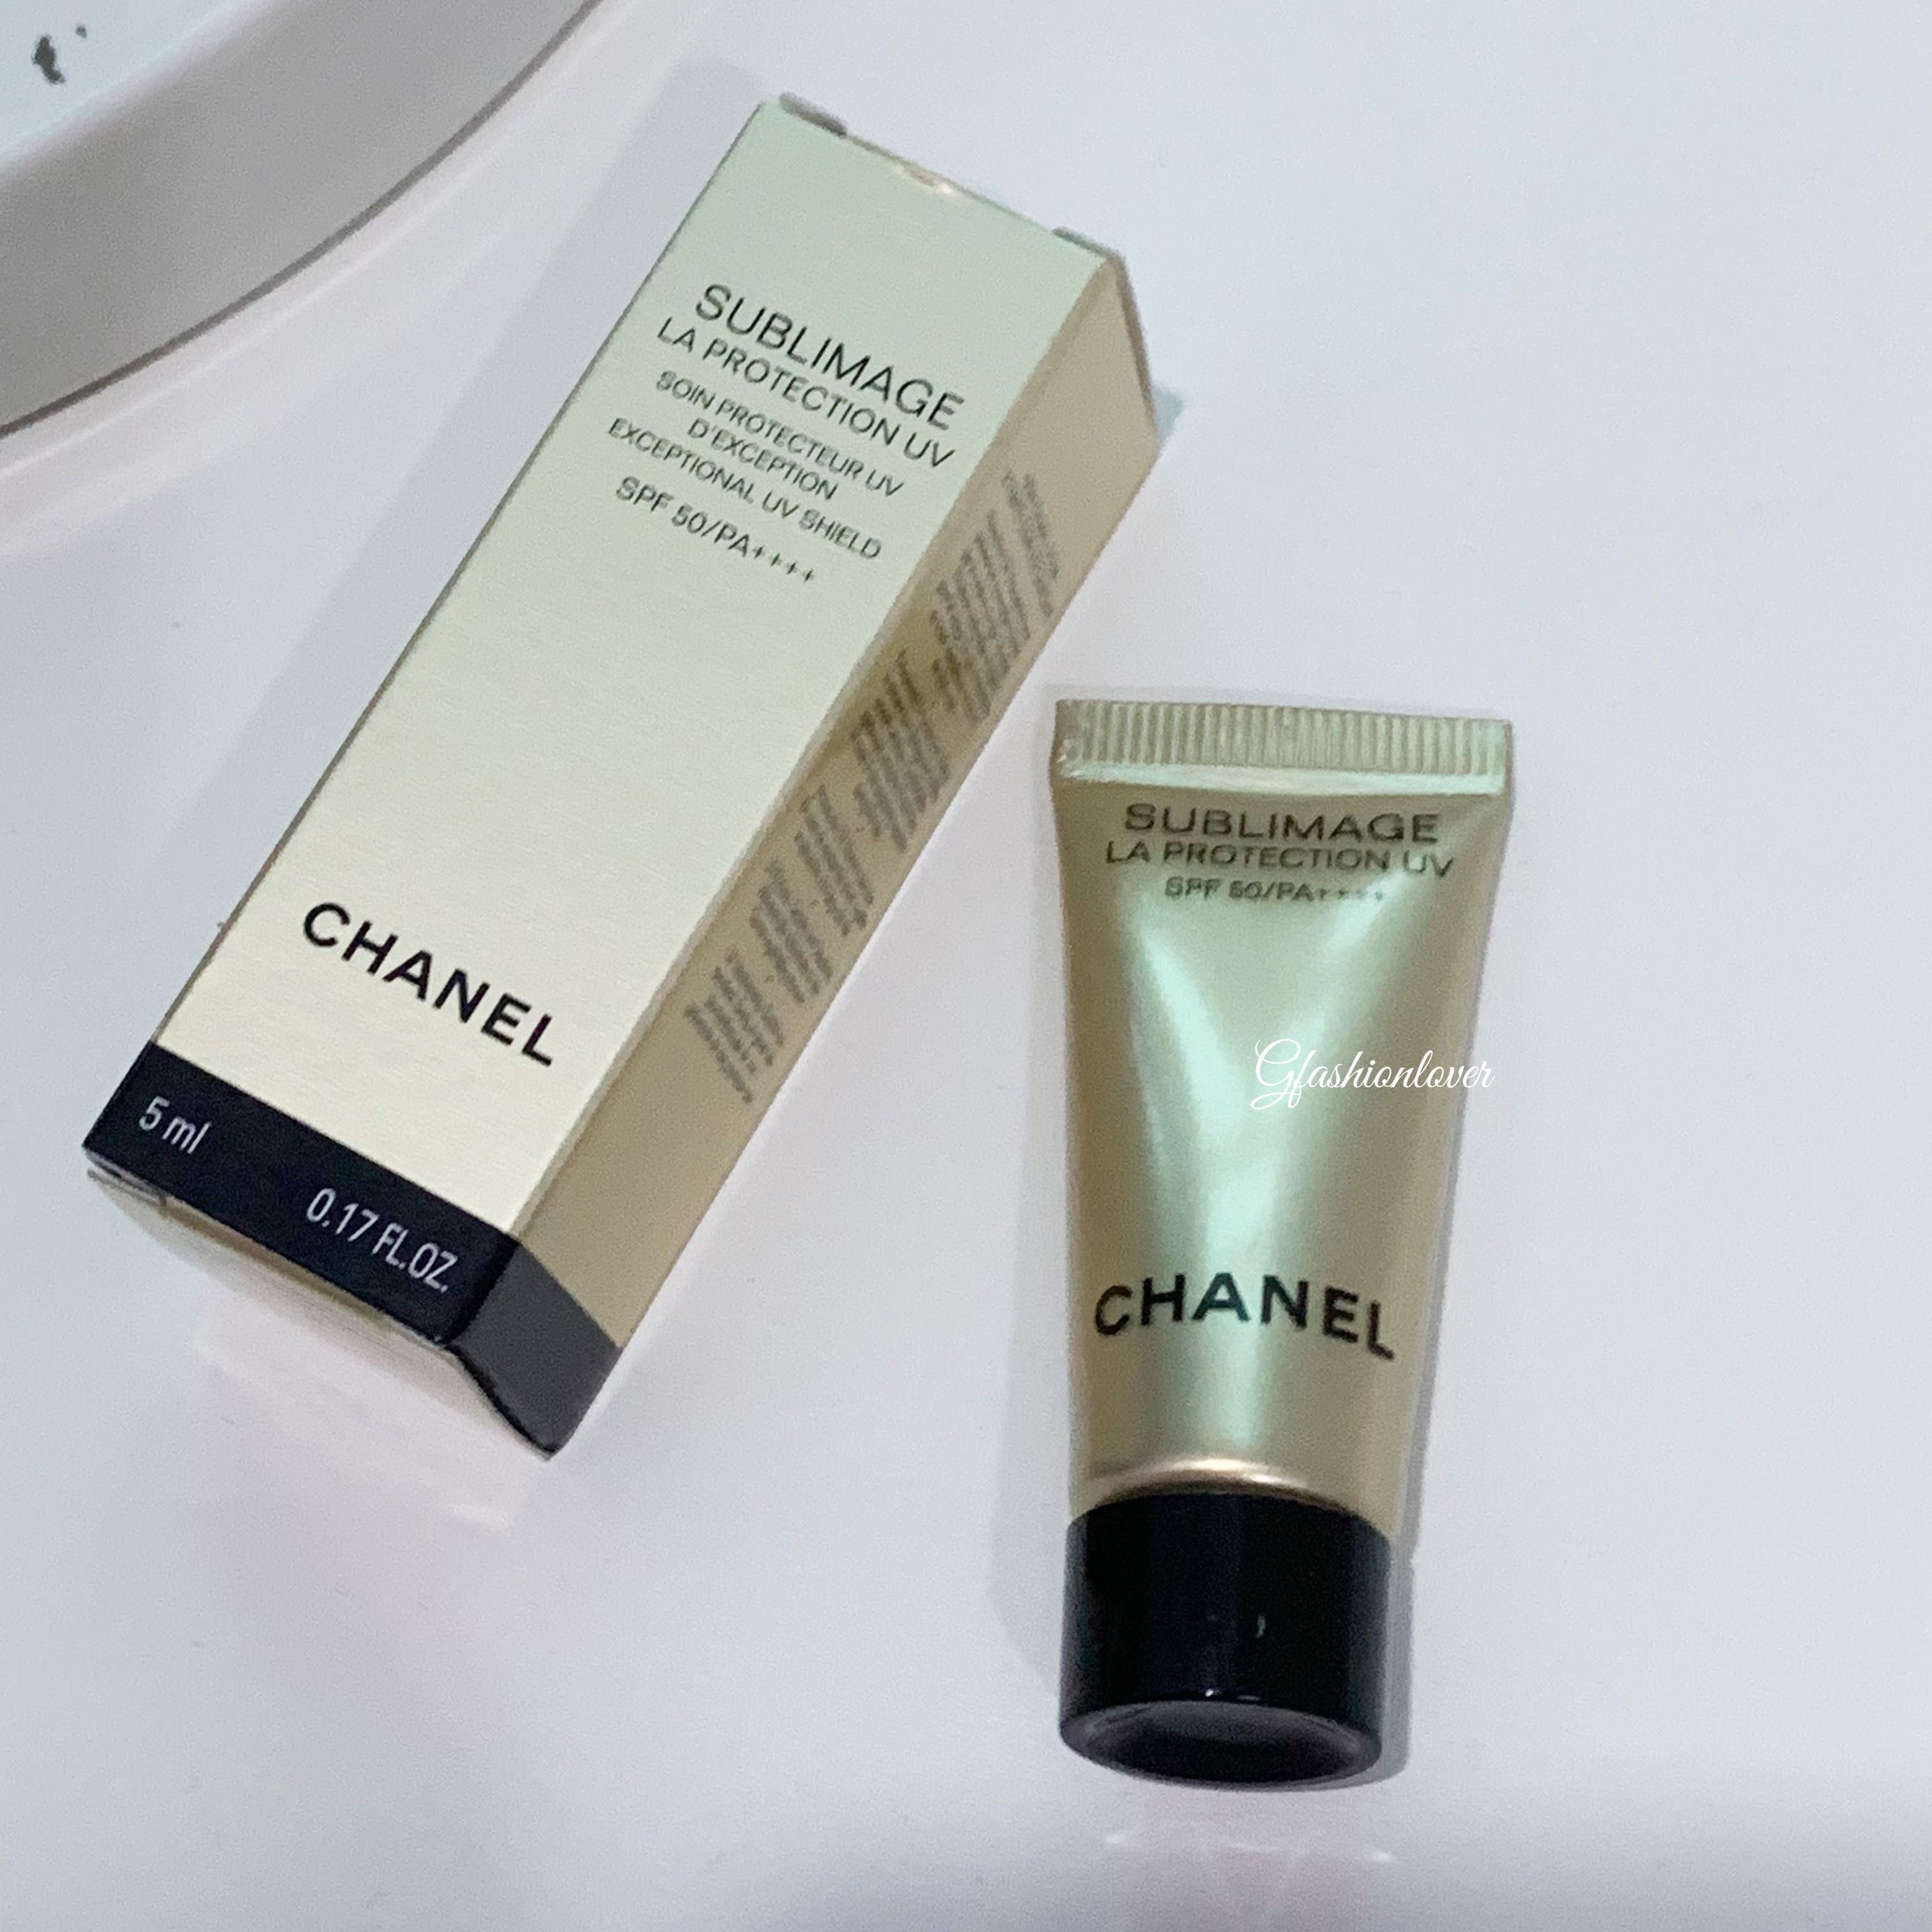 NEW  CHANEL SUBLIMAGE Cleansers  Review  Angela van Rose  YouTube